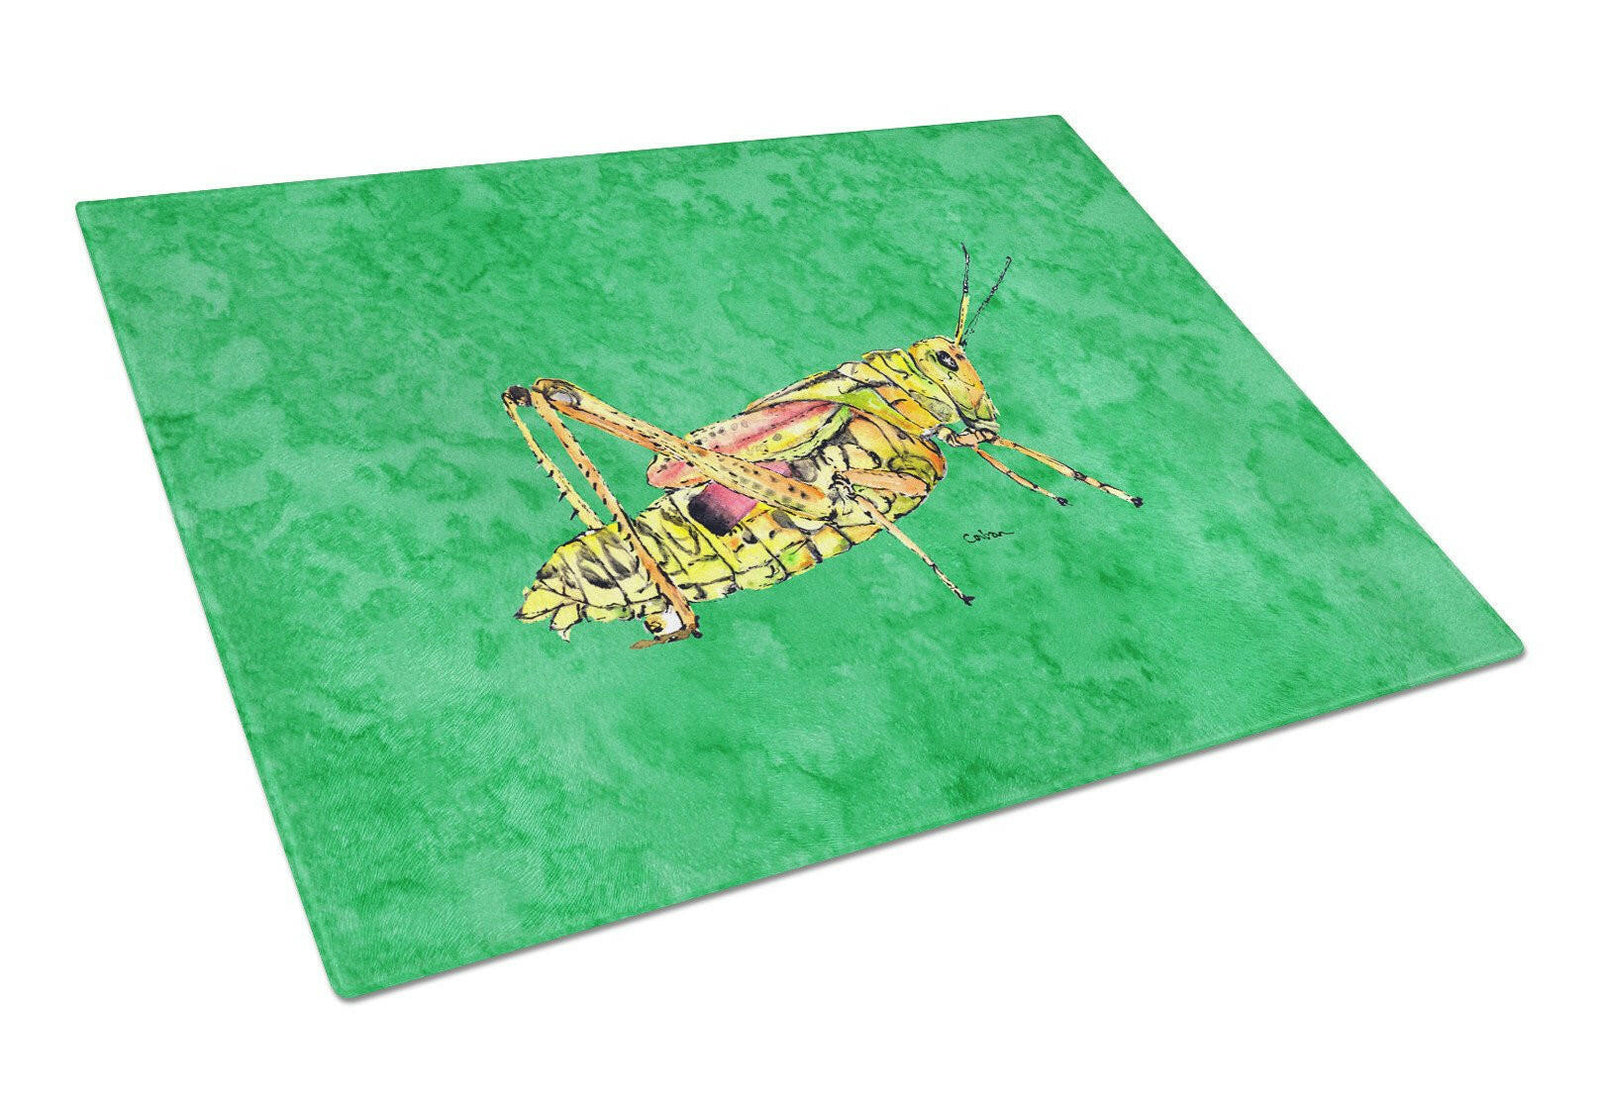 Grasshopper on Green Glass Cutting Board Large by Caroline's Treasures